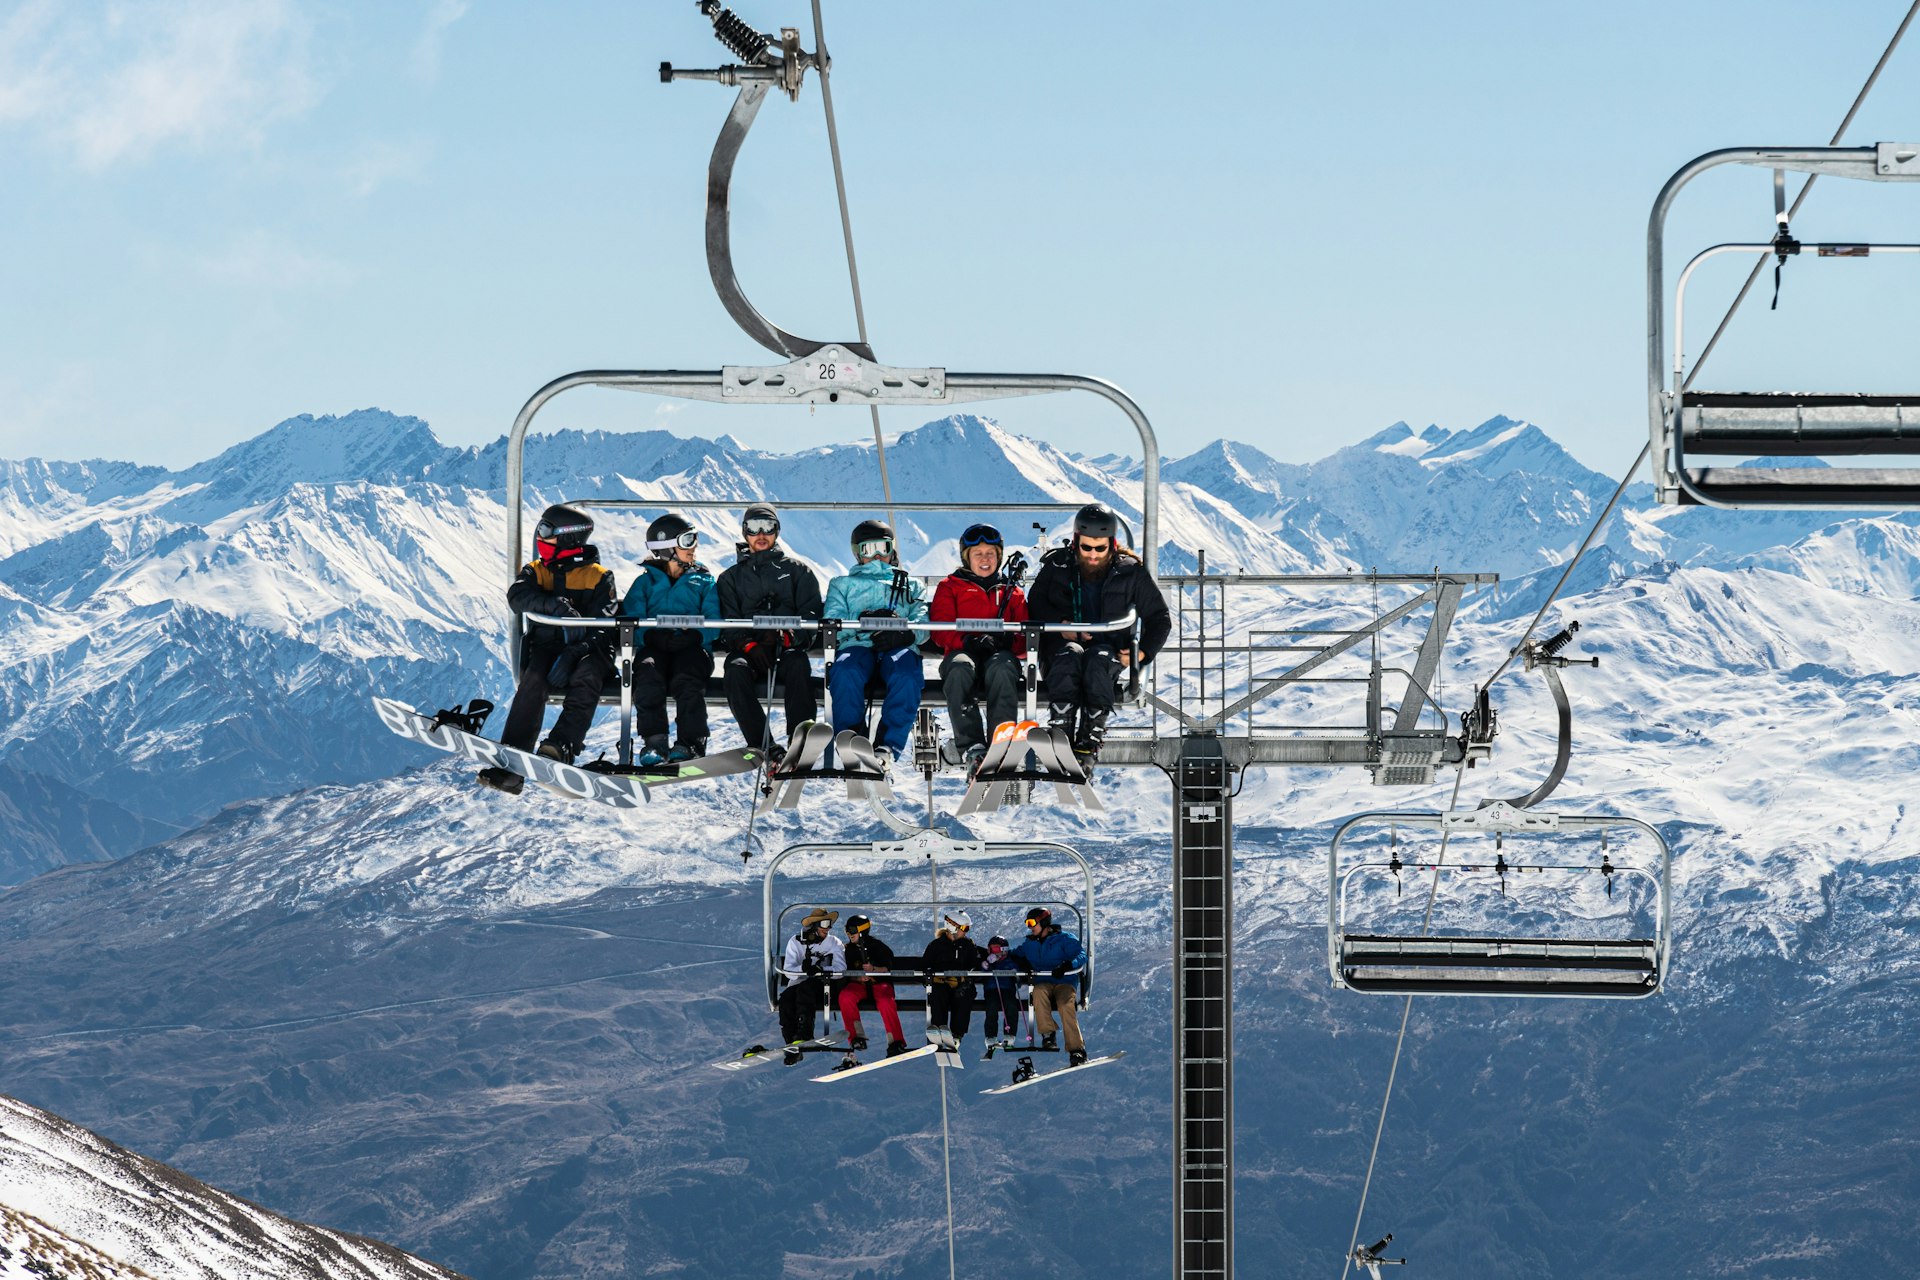 Skier and snowboarder ride a chairlift in the Remarkables ski resort in New Zealand 